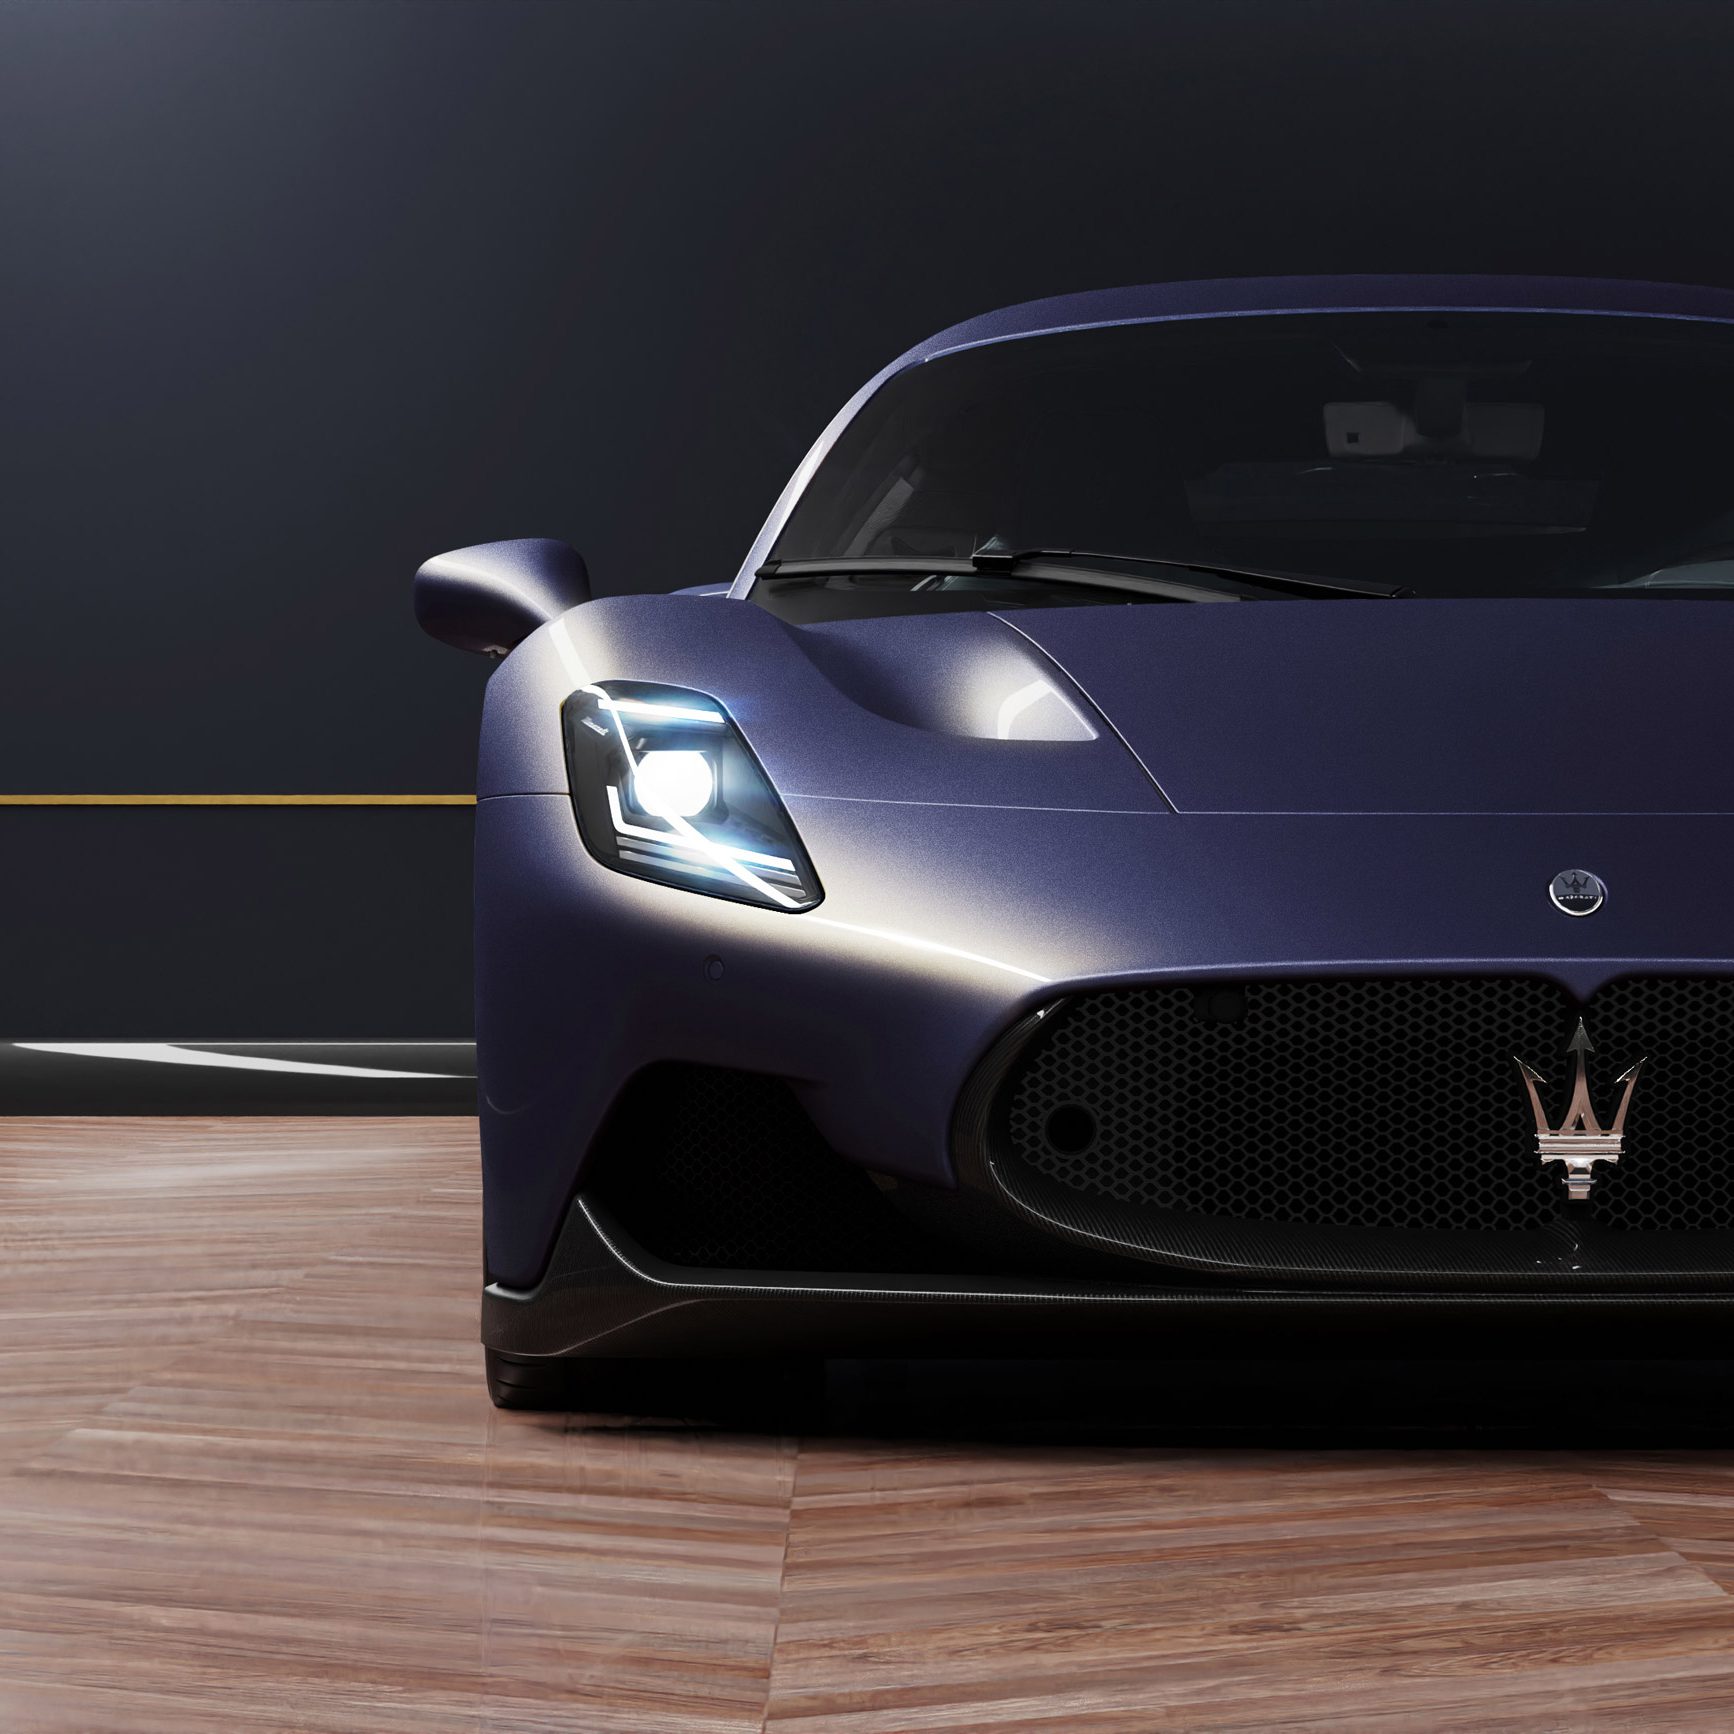 David Beckham designs Maseratis informed by "passion for classic cars"